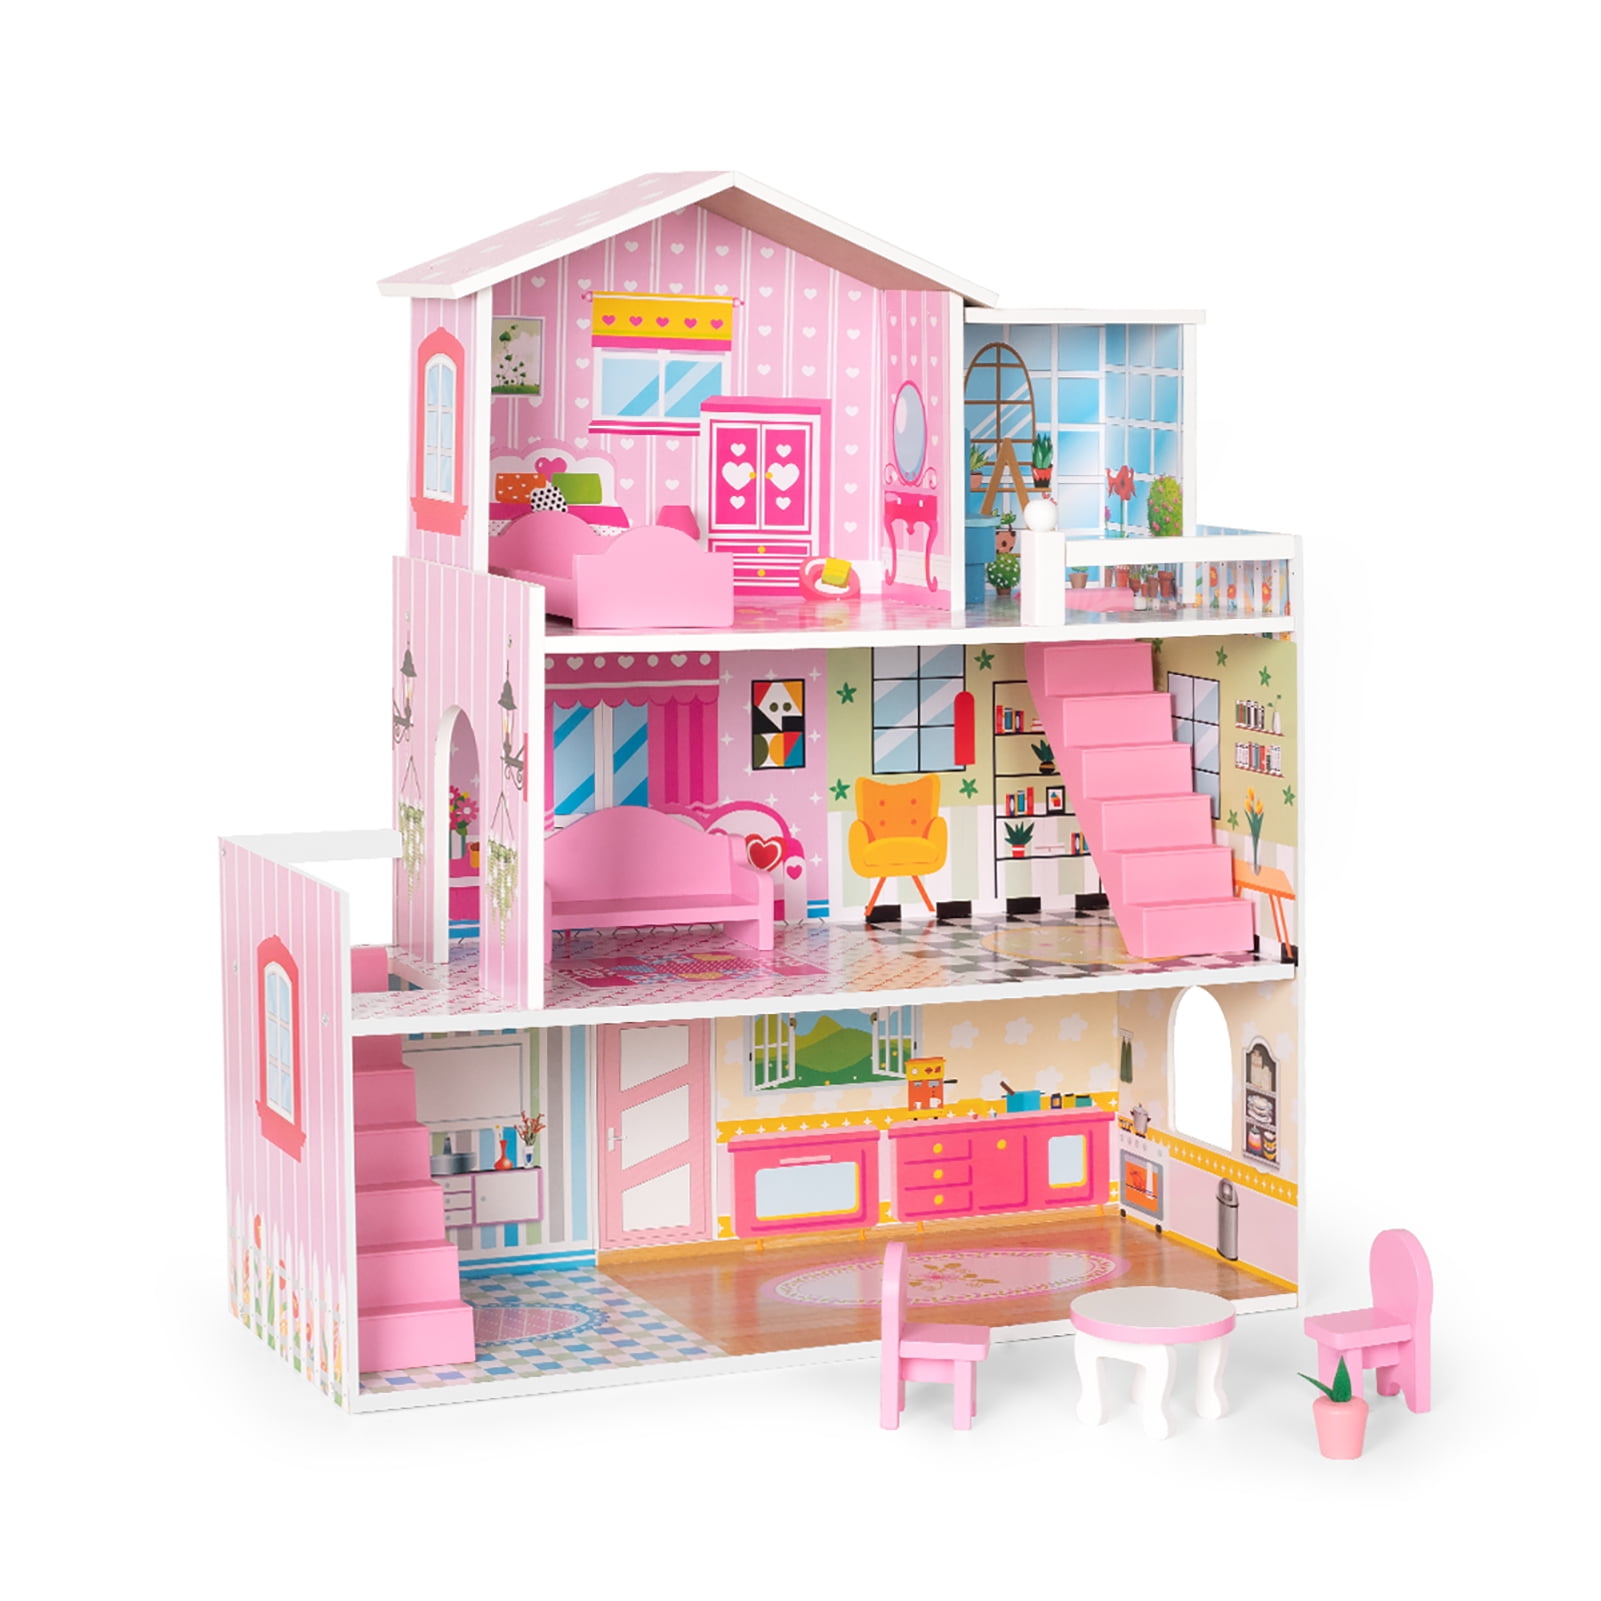 Furniture DIY HOUSE XMAS KIDS GIFT LOL SURPRISE DOLL HOUSE MADE WITH REAL WOOD 